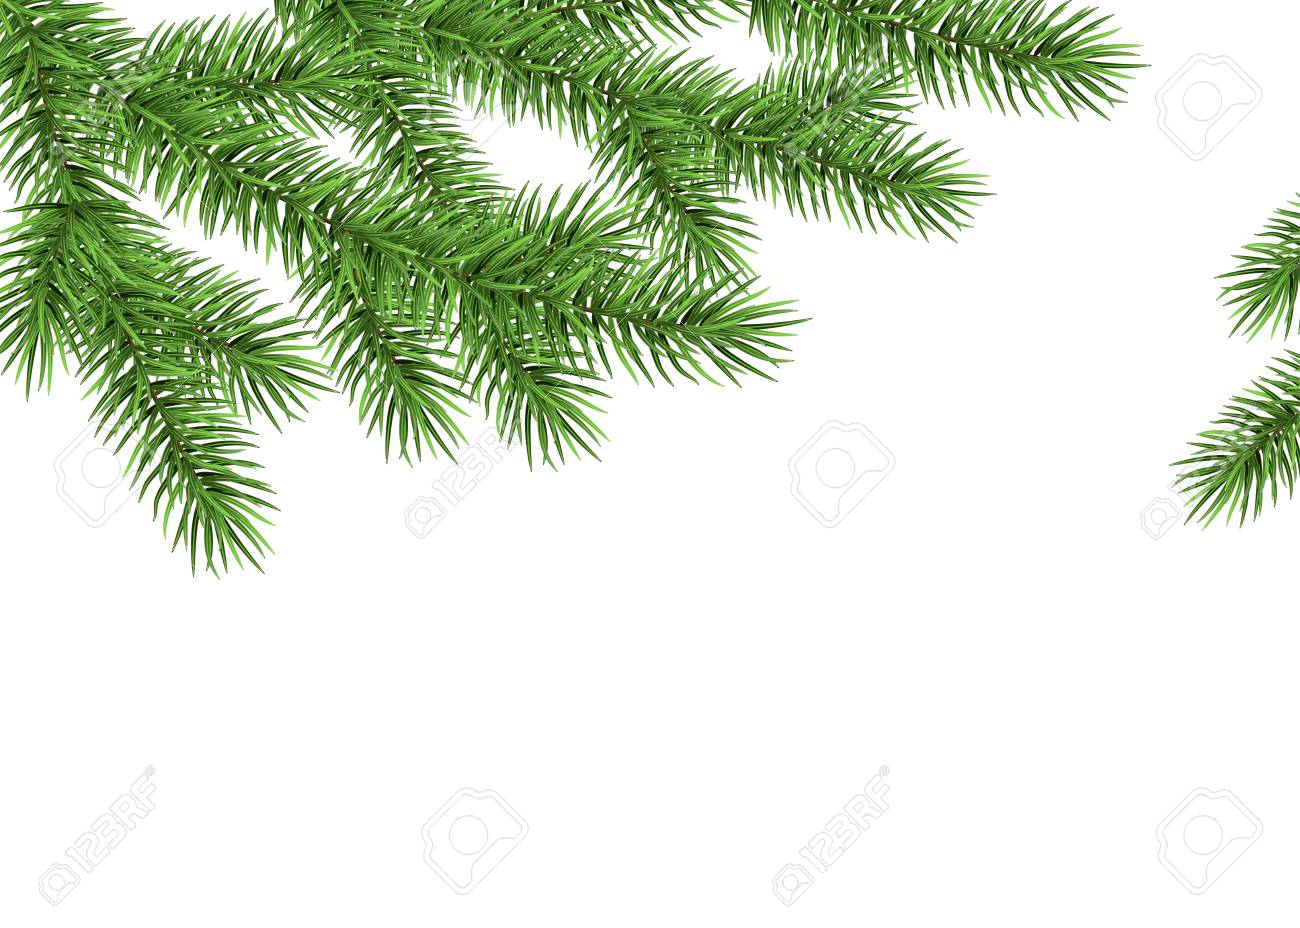 Xmas Background With Spruce Branch Green Fir Realistic Christmas